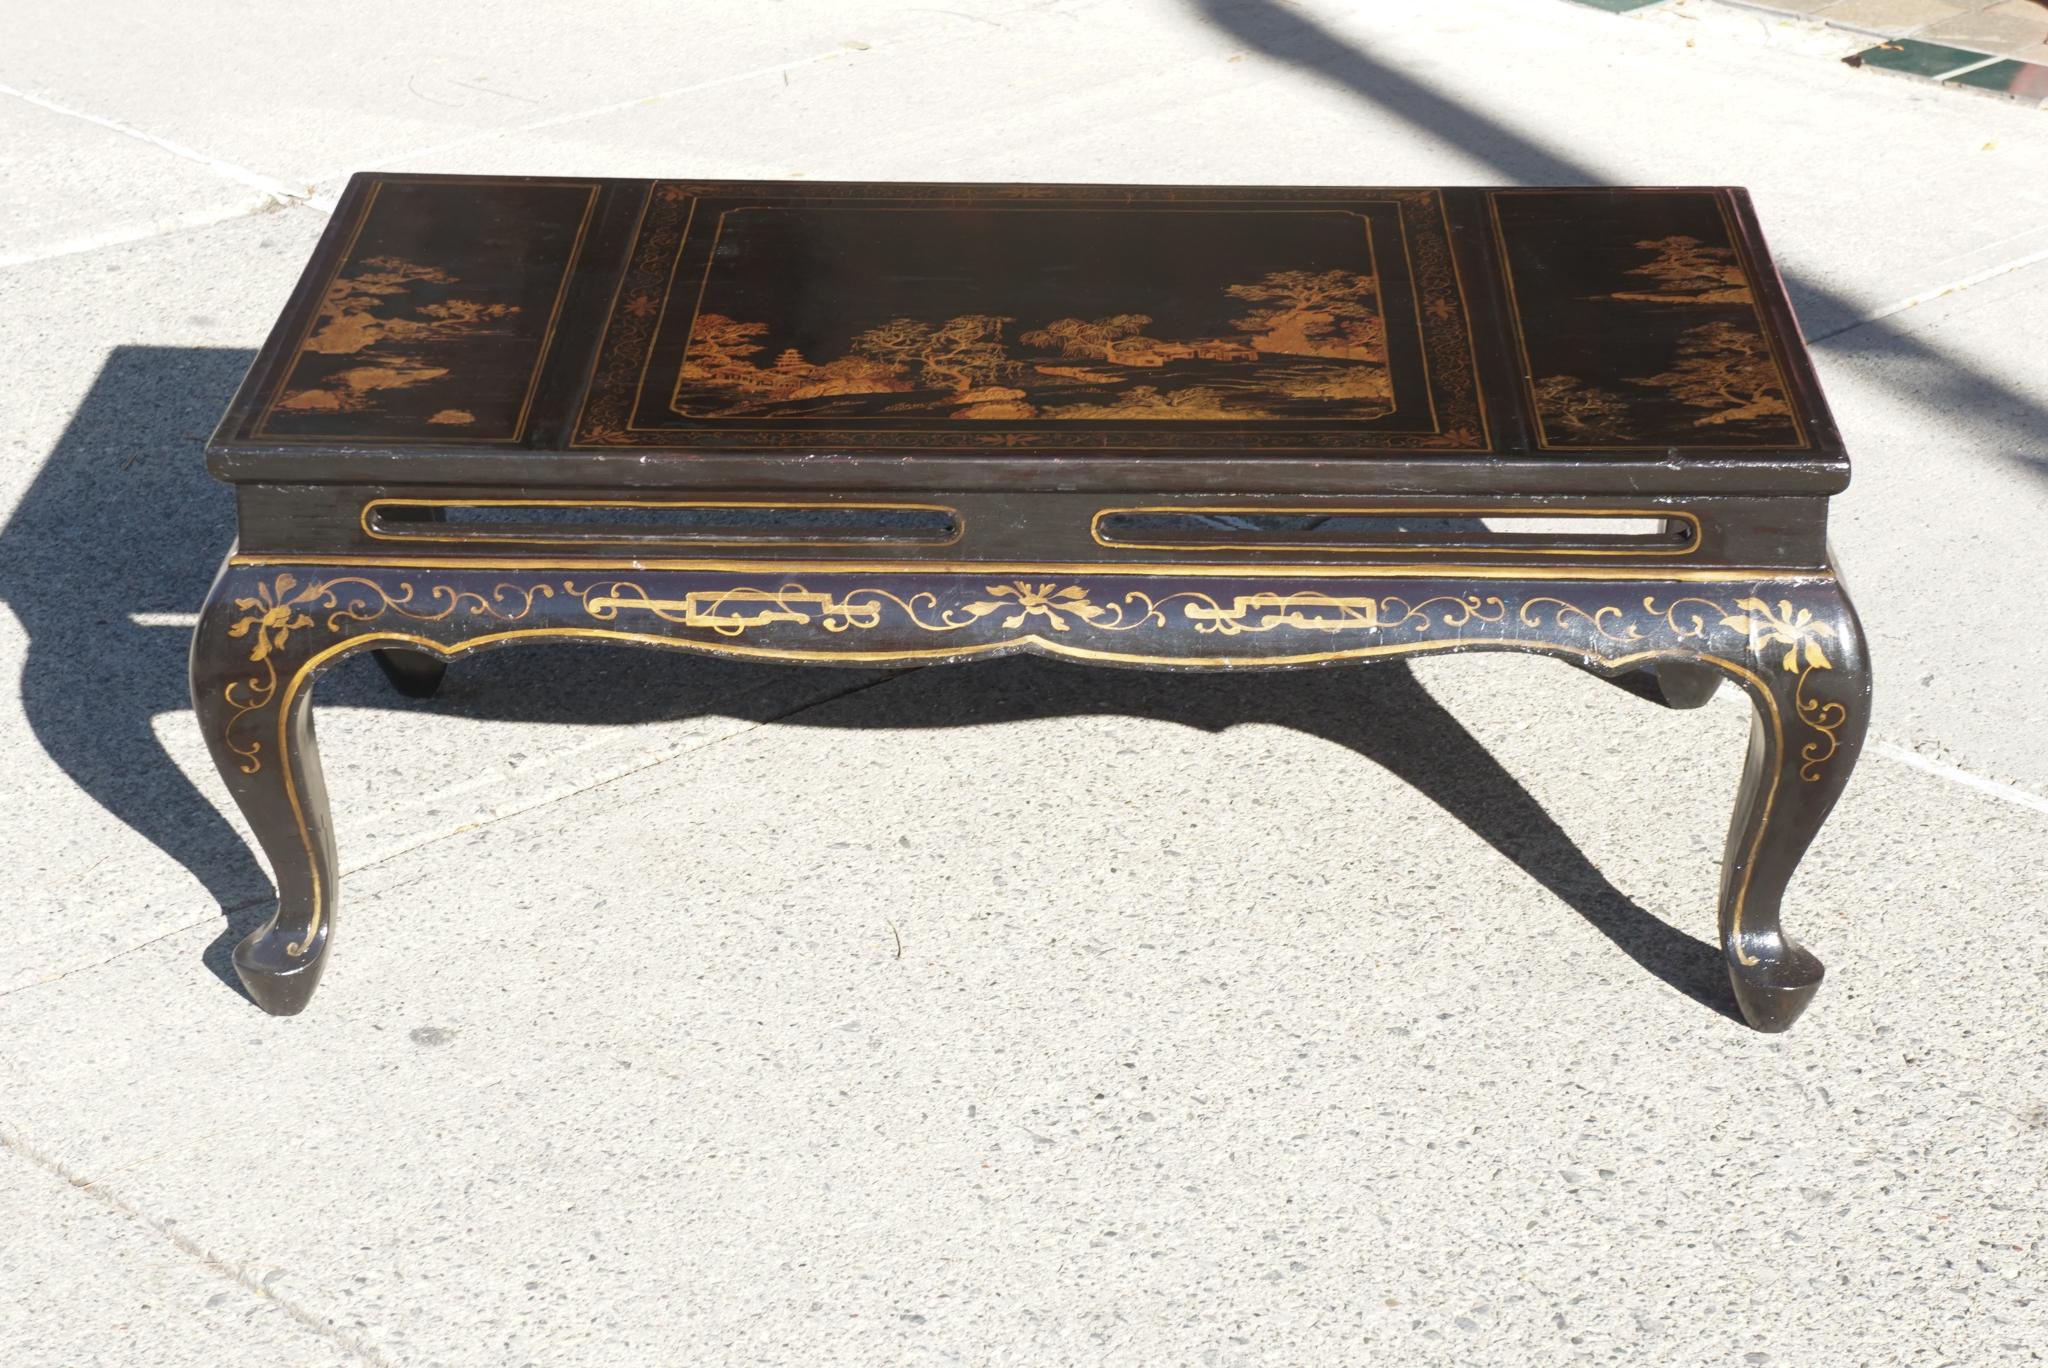 This fine early 20th century lacquered chinoiserie coffee table was made in France, between 1920 and 1940. Produced to accommodate the large demand for chic sophisticated furniture of a growing class of elite consumers, the table is made to imitate